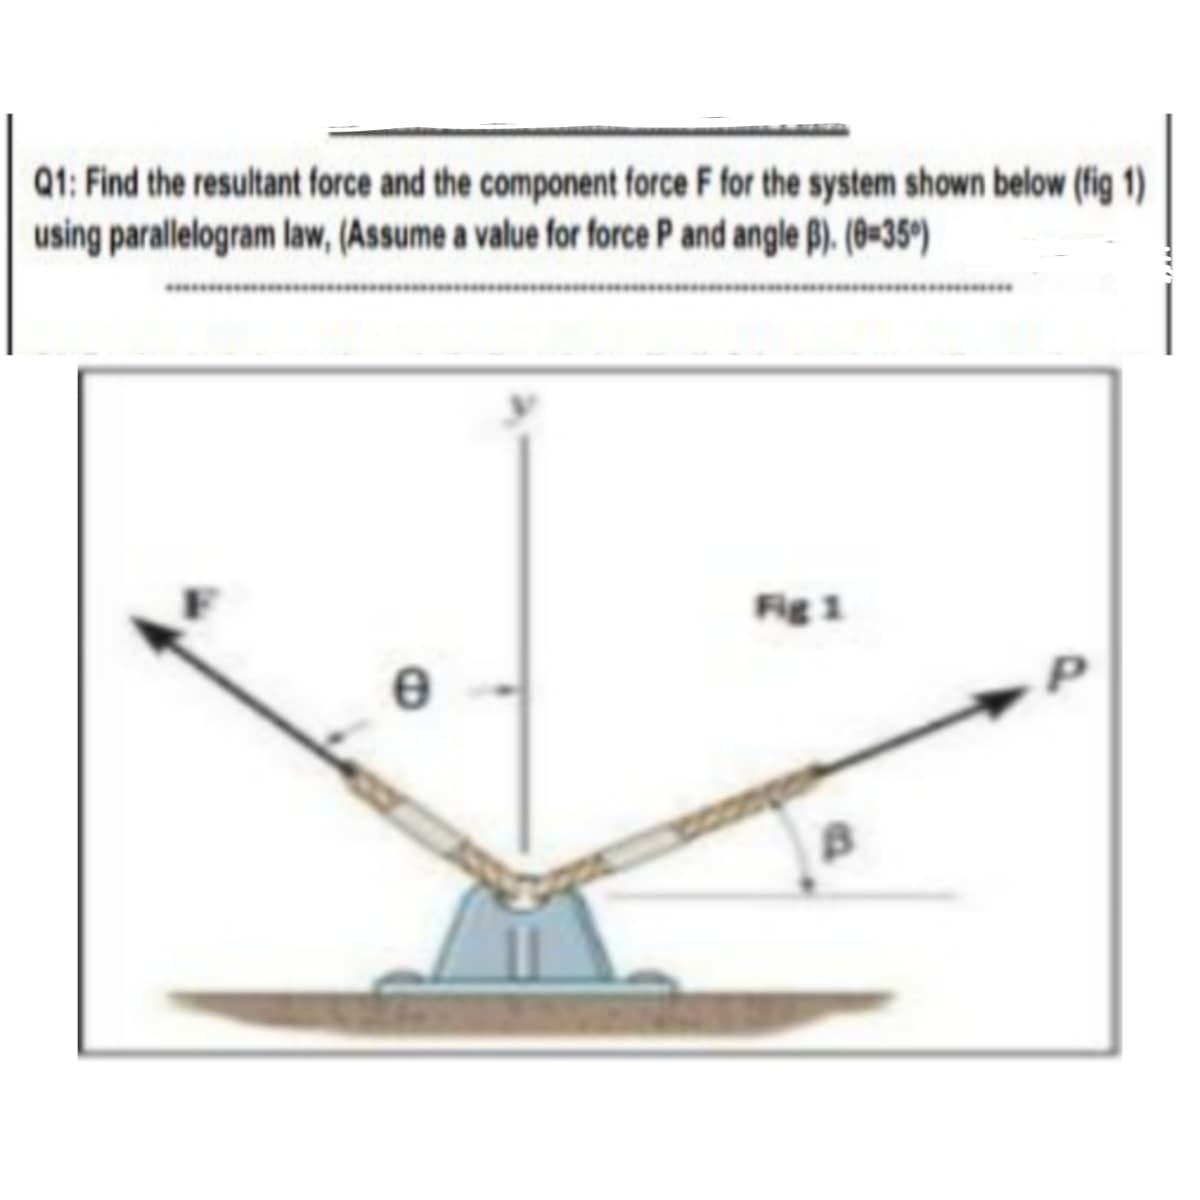 Q1: Find the resultant force and the component force F for the system shown below (fig 1)
using parallelogram law, (Assume a value for force P and angle B). (8=35°)
Fig 1
